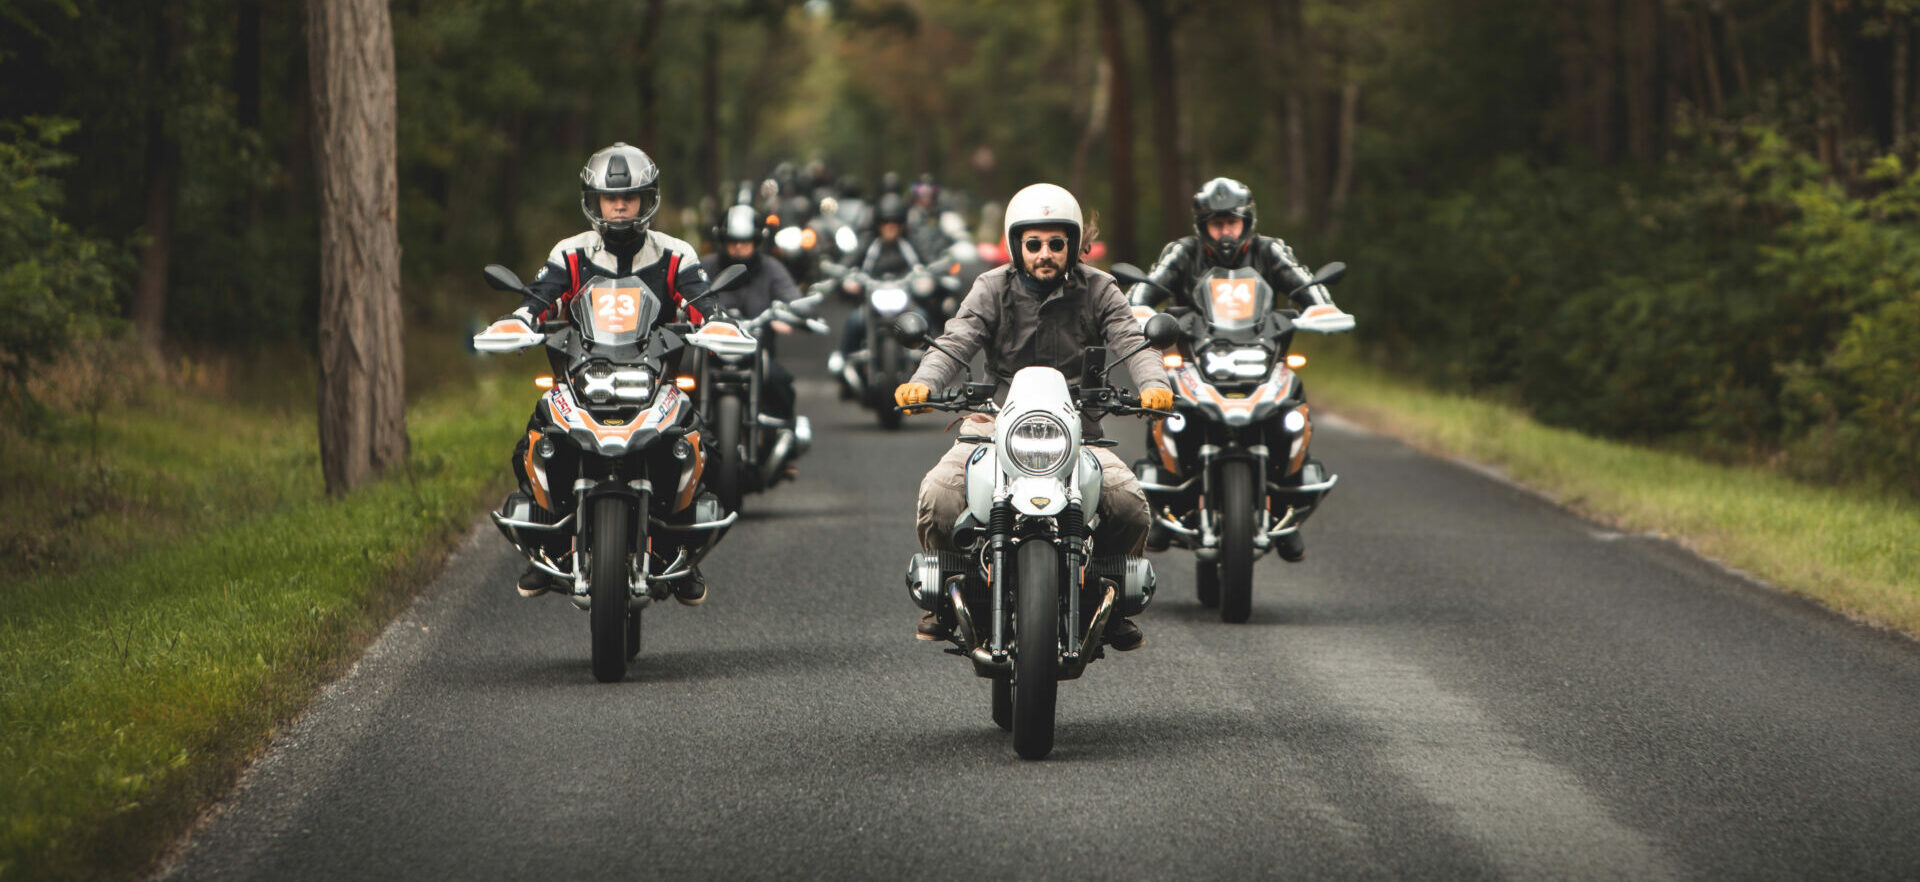 BMW motorcycle fans will converge on Berlin July 2-3 for the 20th BMW Motorrad Days event. Photo courtesy BMW Motorrad.